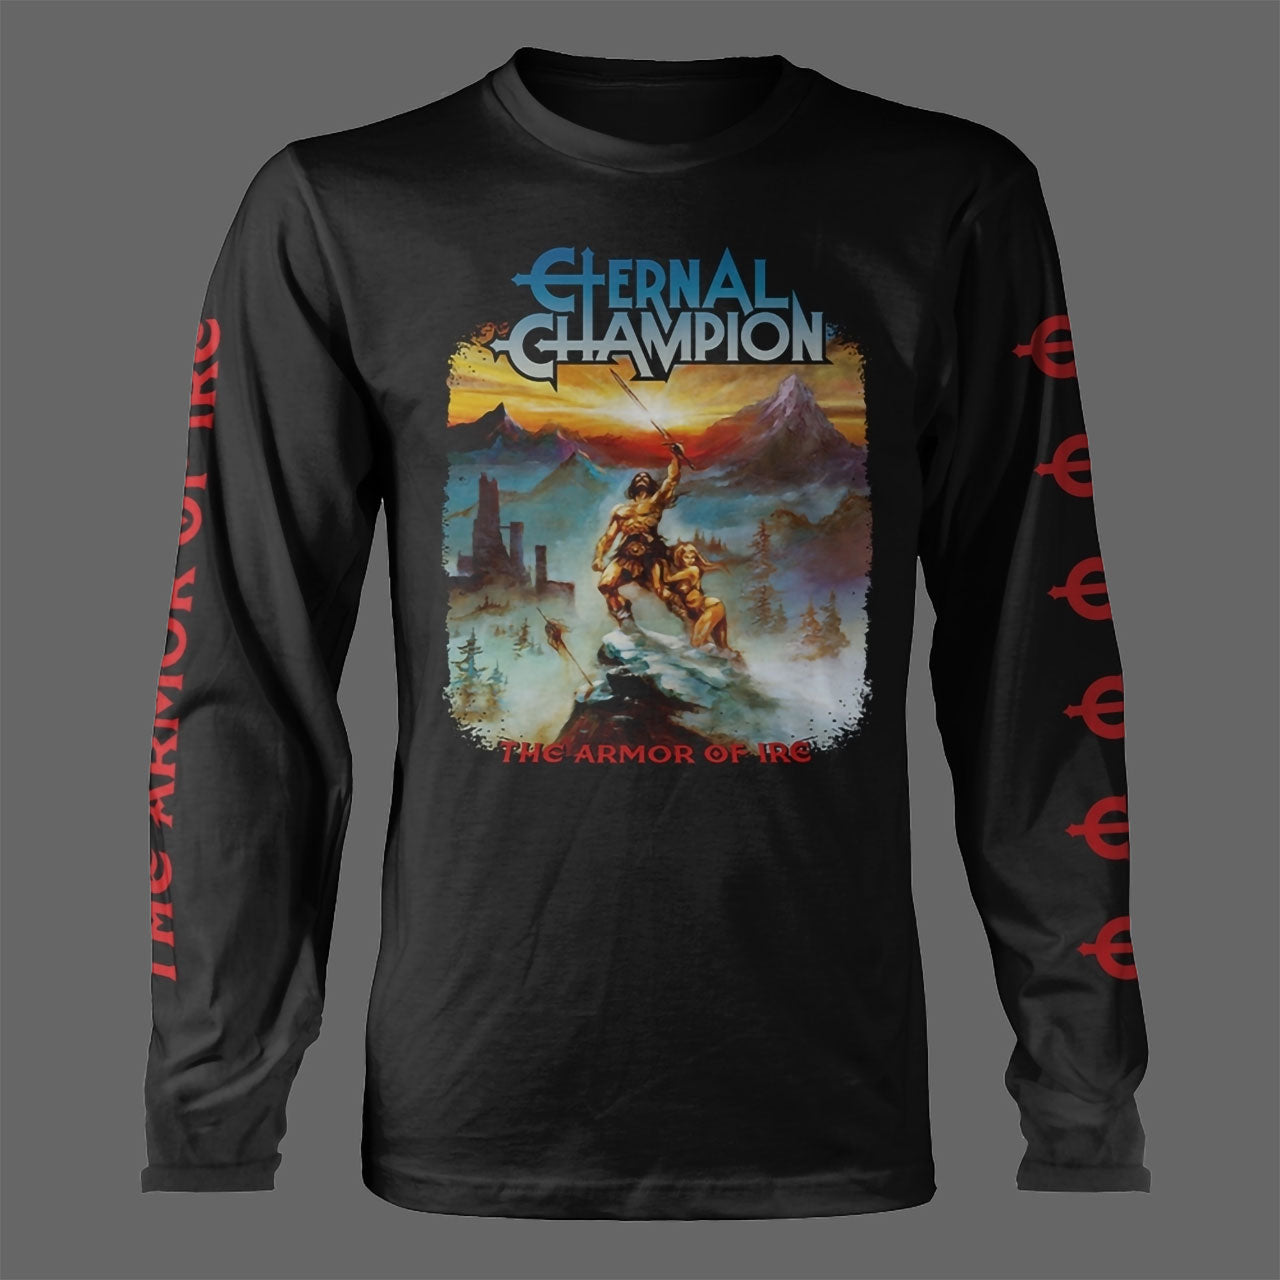 Eternal Champion - The Armor of Ire (Long Sleeve T-Shirt)